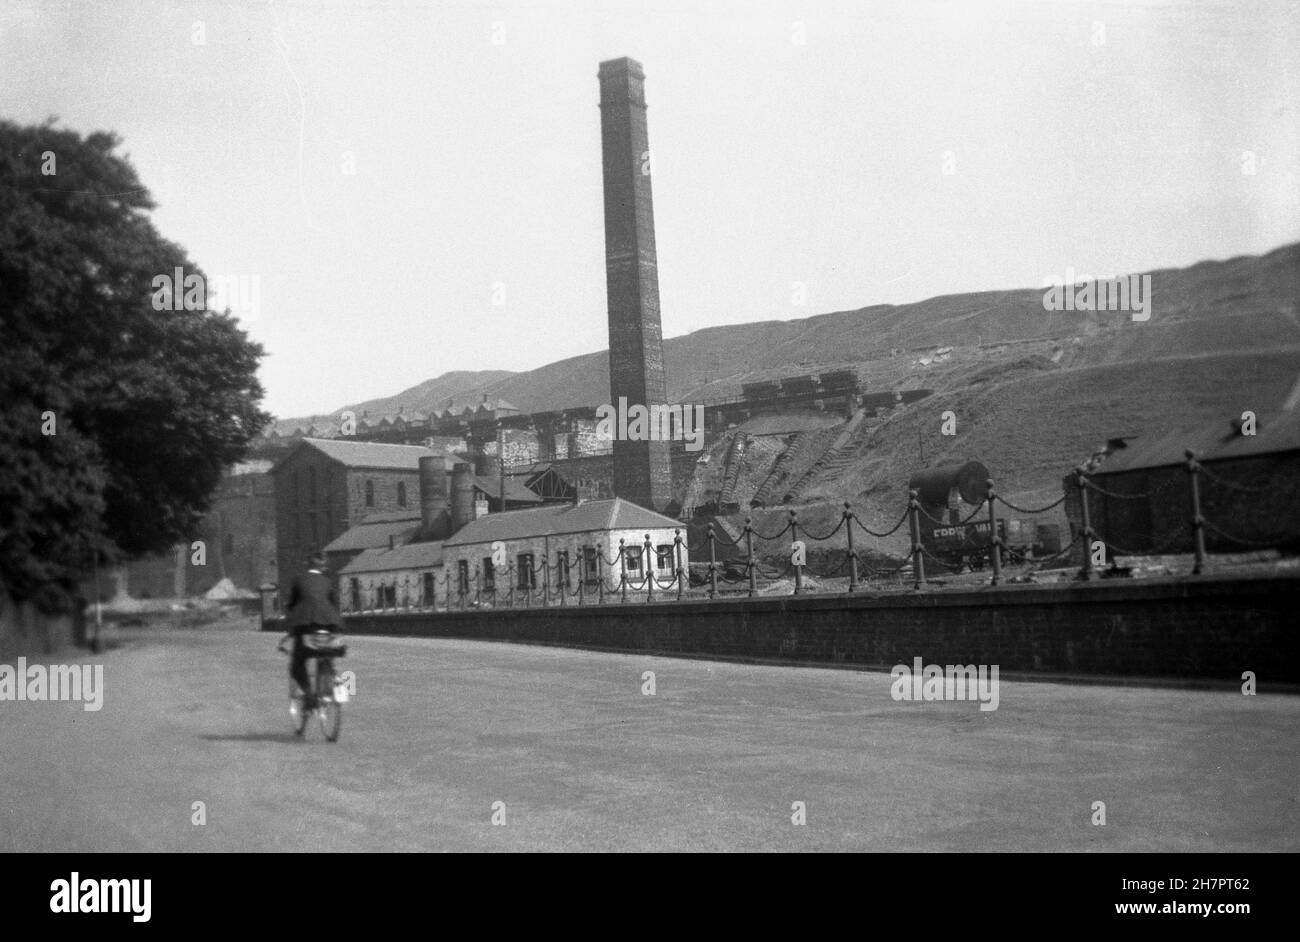 1935, historical, a young man cycling past a colliery in the valley at Ebbw Vale, Wales, UK. From the1800s, Ebbw Vale had developed into a major centre for the production of iron and steel, powered by the coal from tthe numerous mines in the area. In the picture we can see the mine stack or chimney which was attached to the engine house and which interestingly is a square construction as opposed to the normal round. Stock Photo